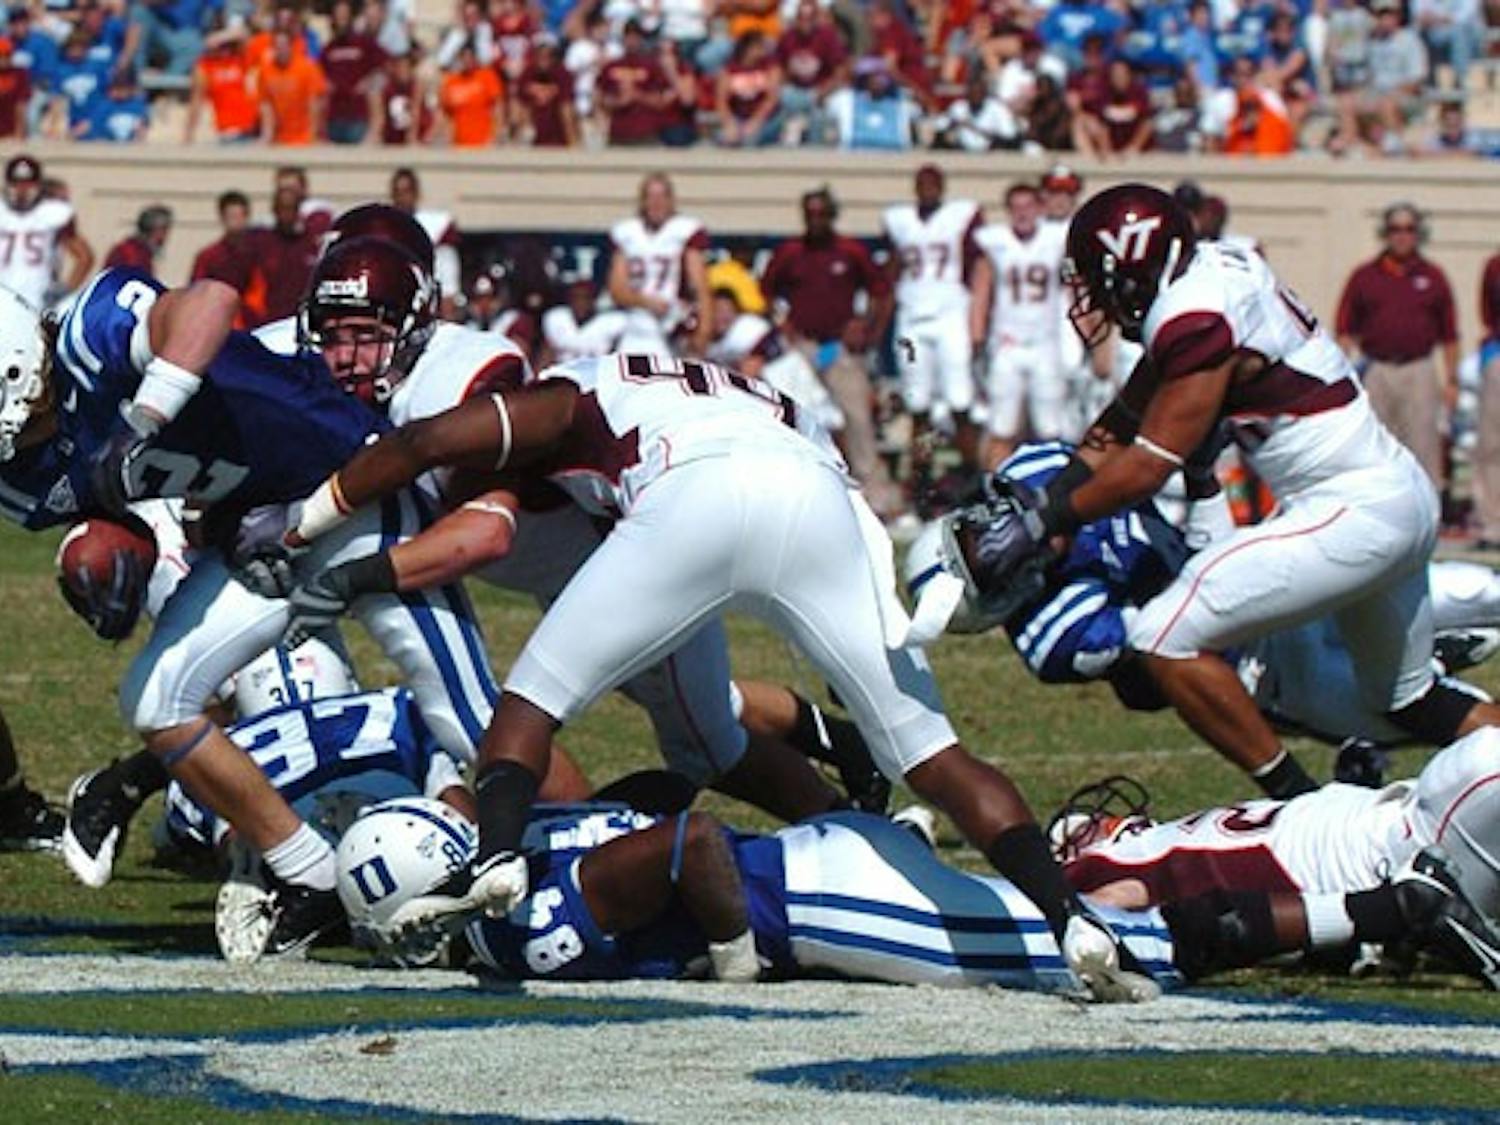 The Blue Devils racked up over 300 yards of offense through the air, but fell short in a 34-26 loss to Virginia Tech Saturday.